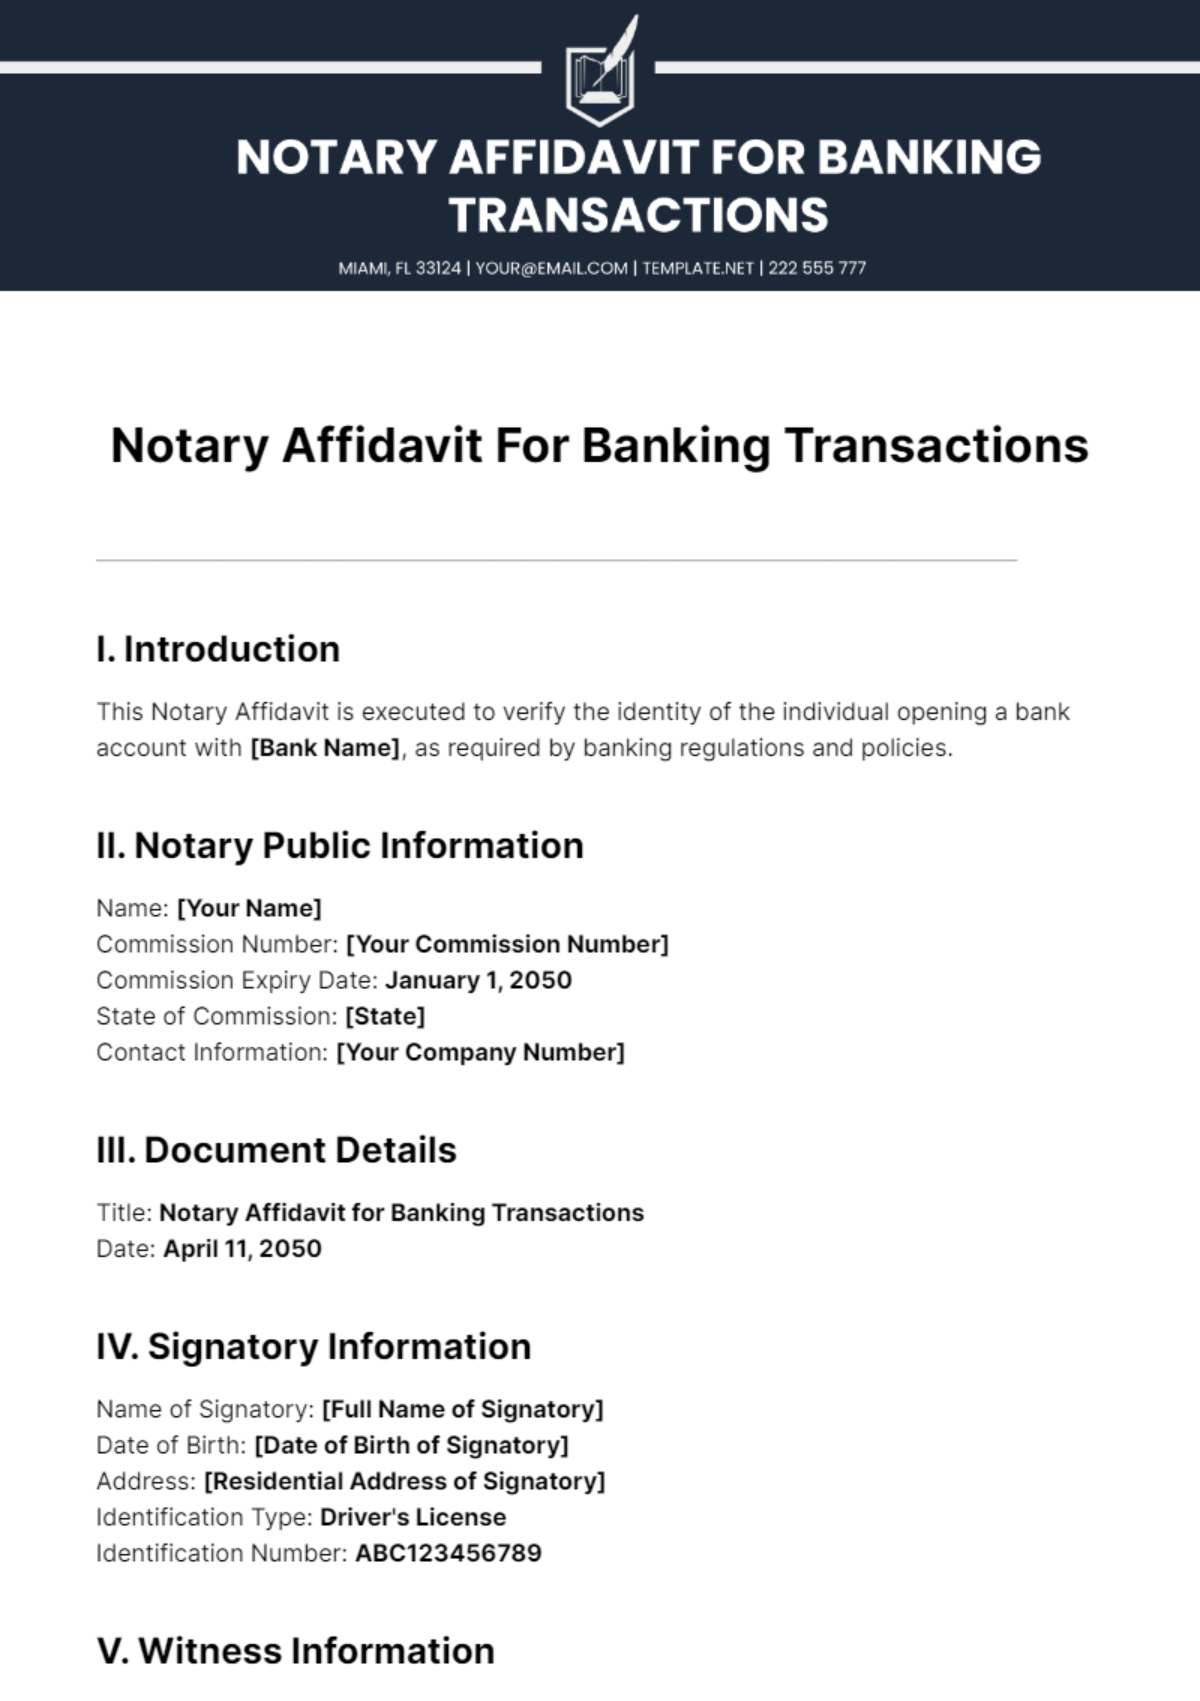 Notary Affidavit For Banking Transactions Template